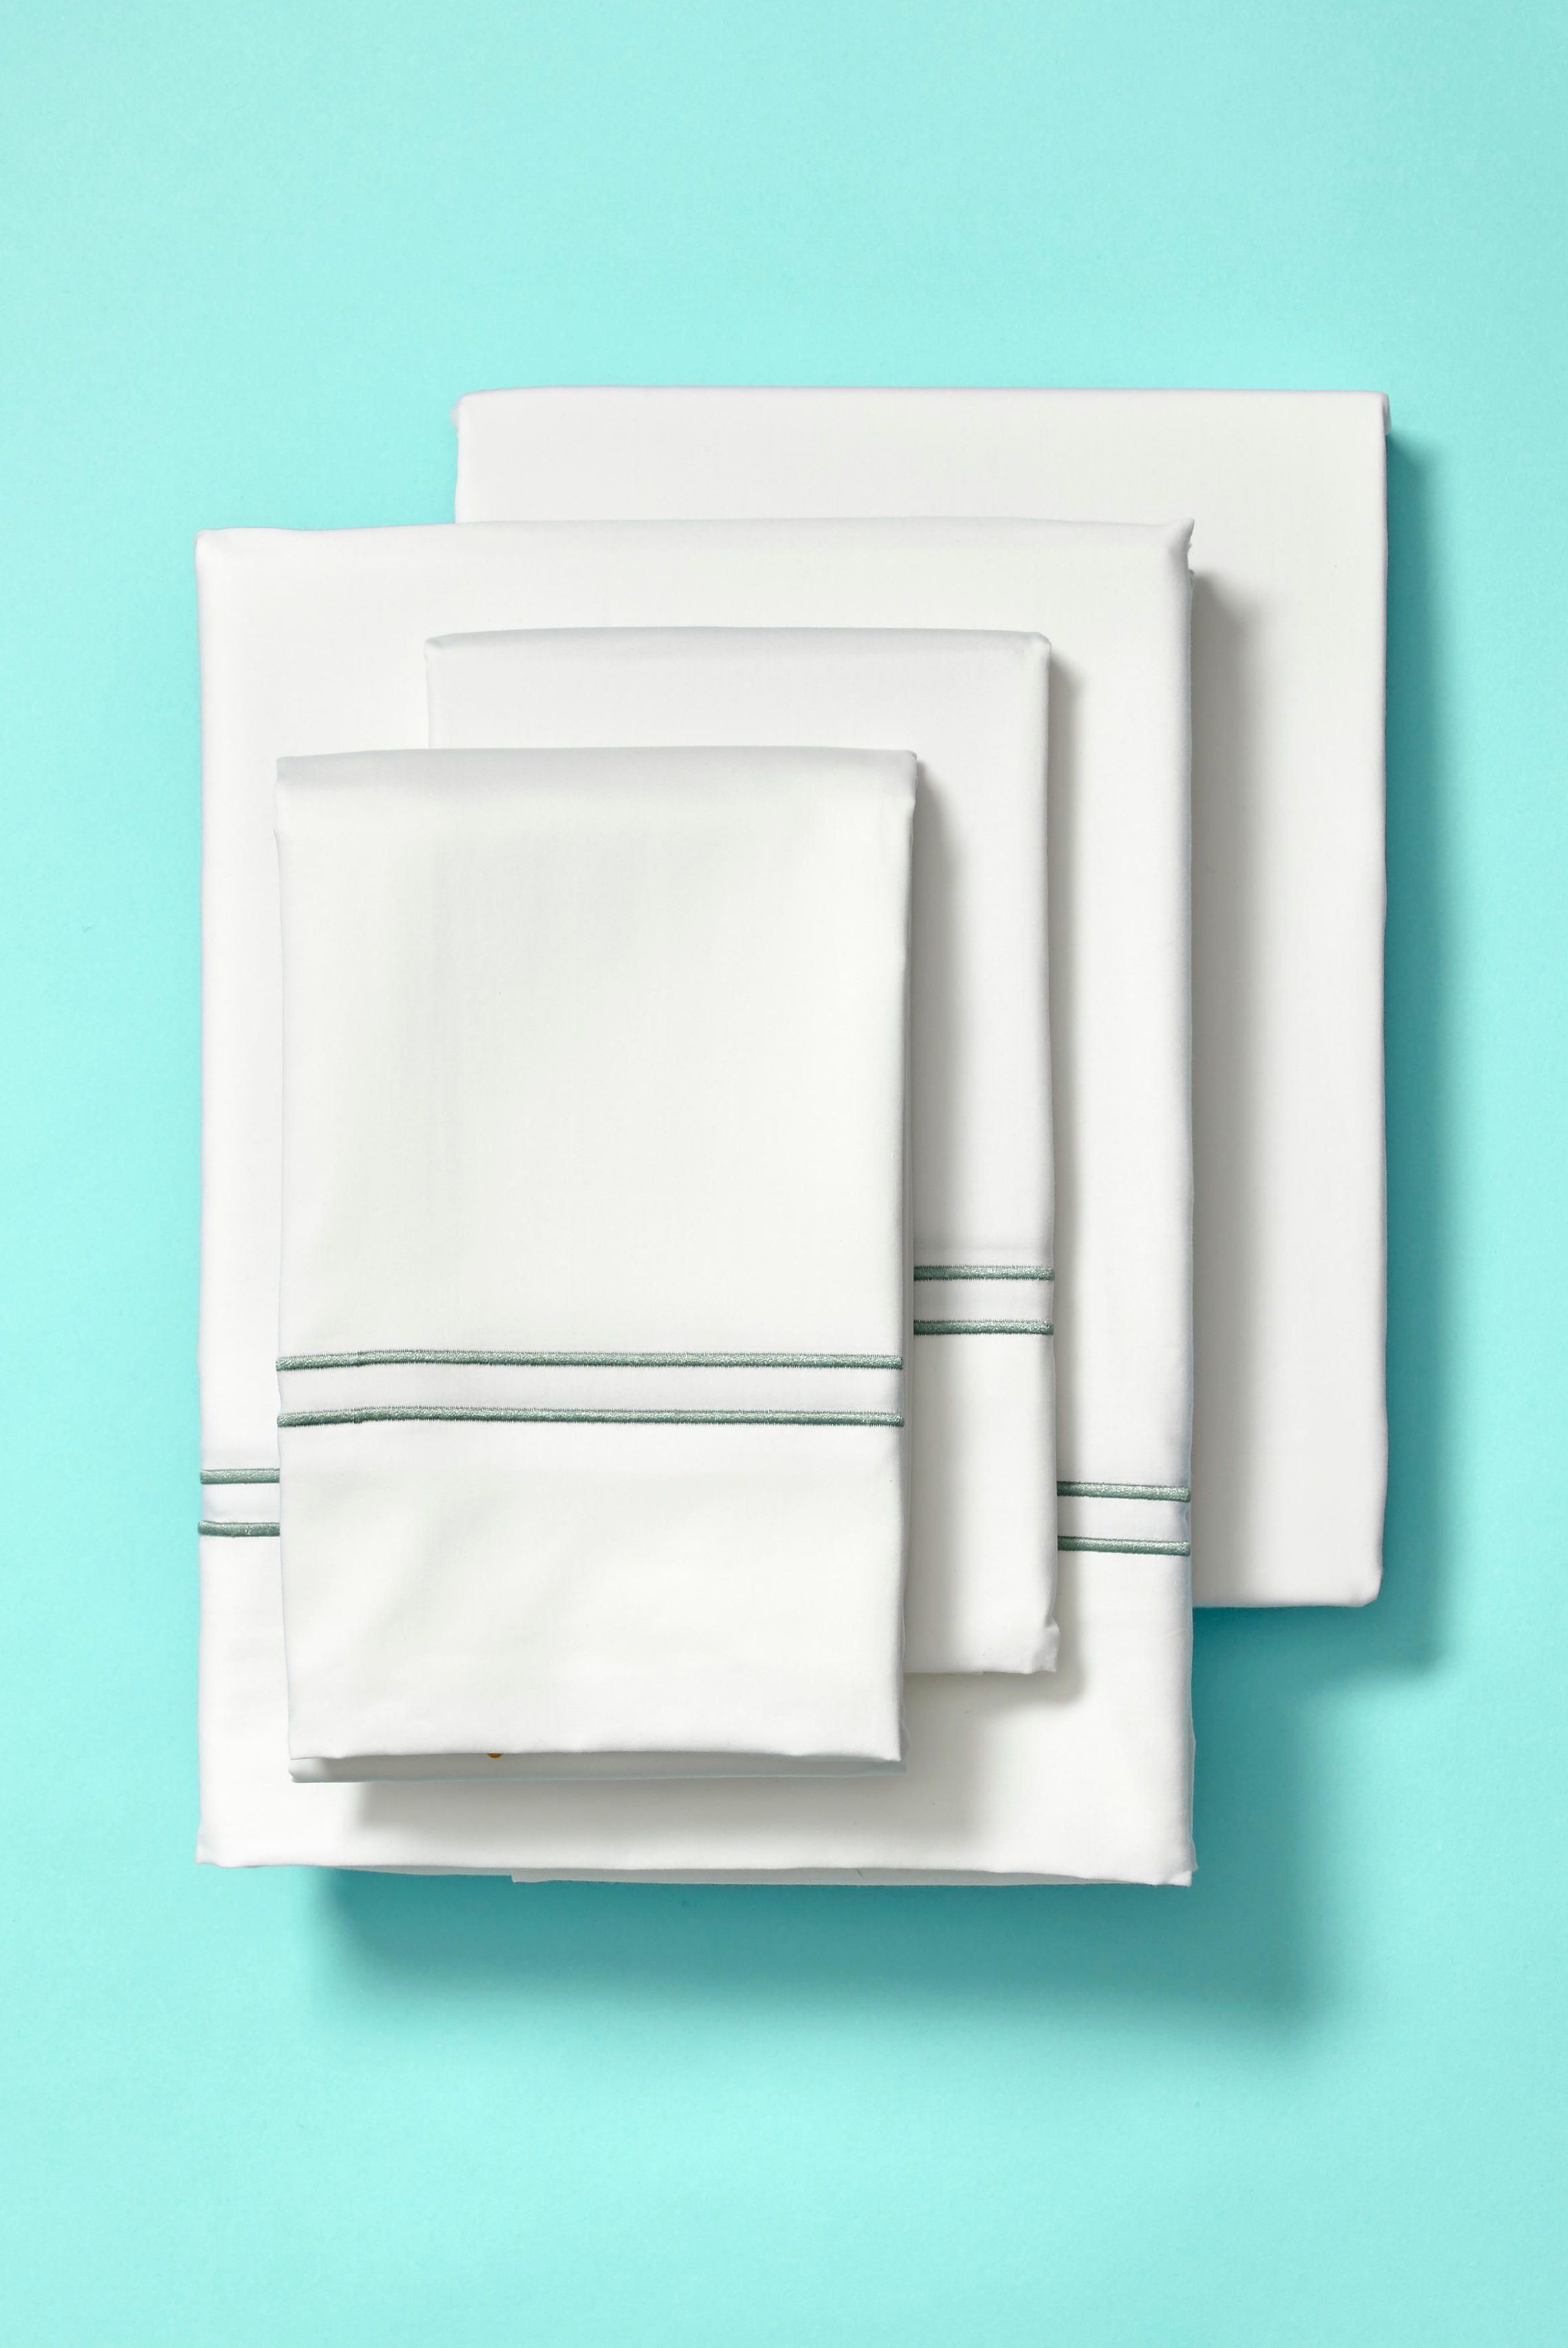 10 Softest Sheet Sets To Buy In 2020 Soft Comfy Bed Sheets